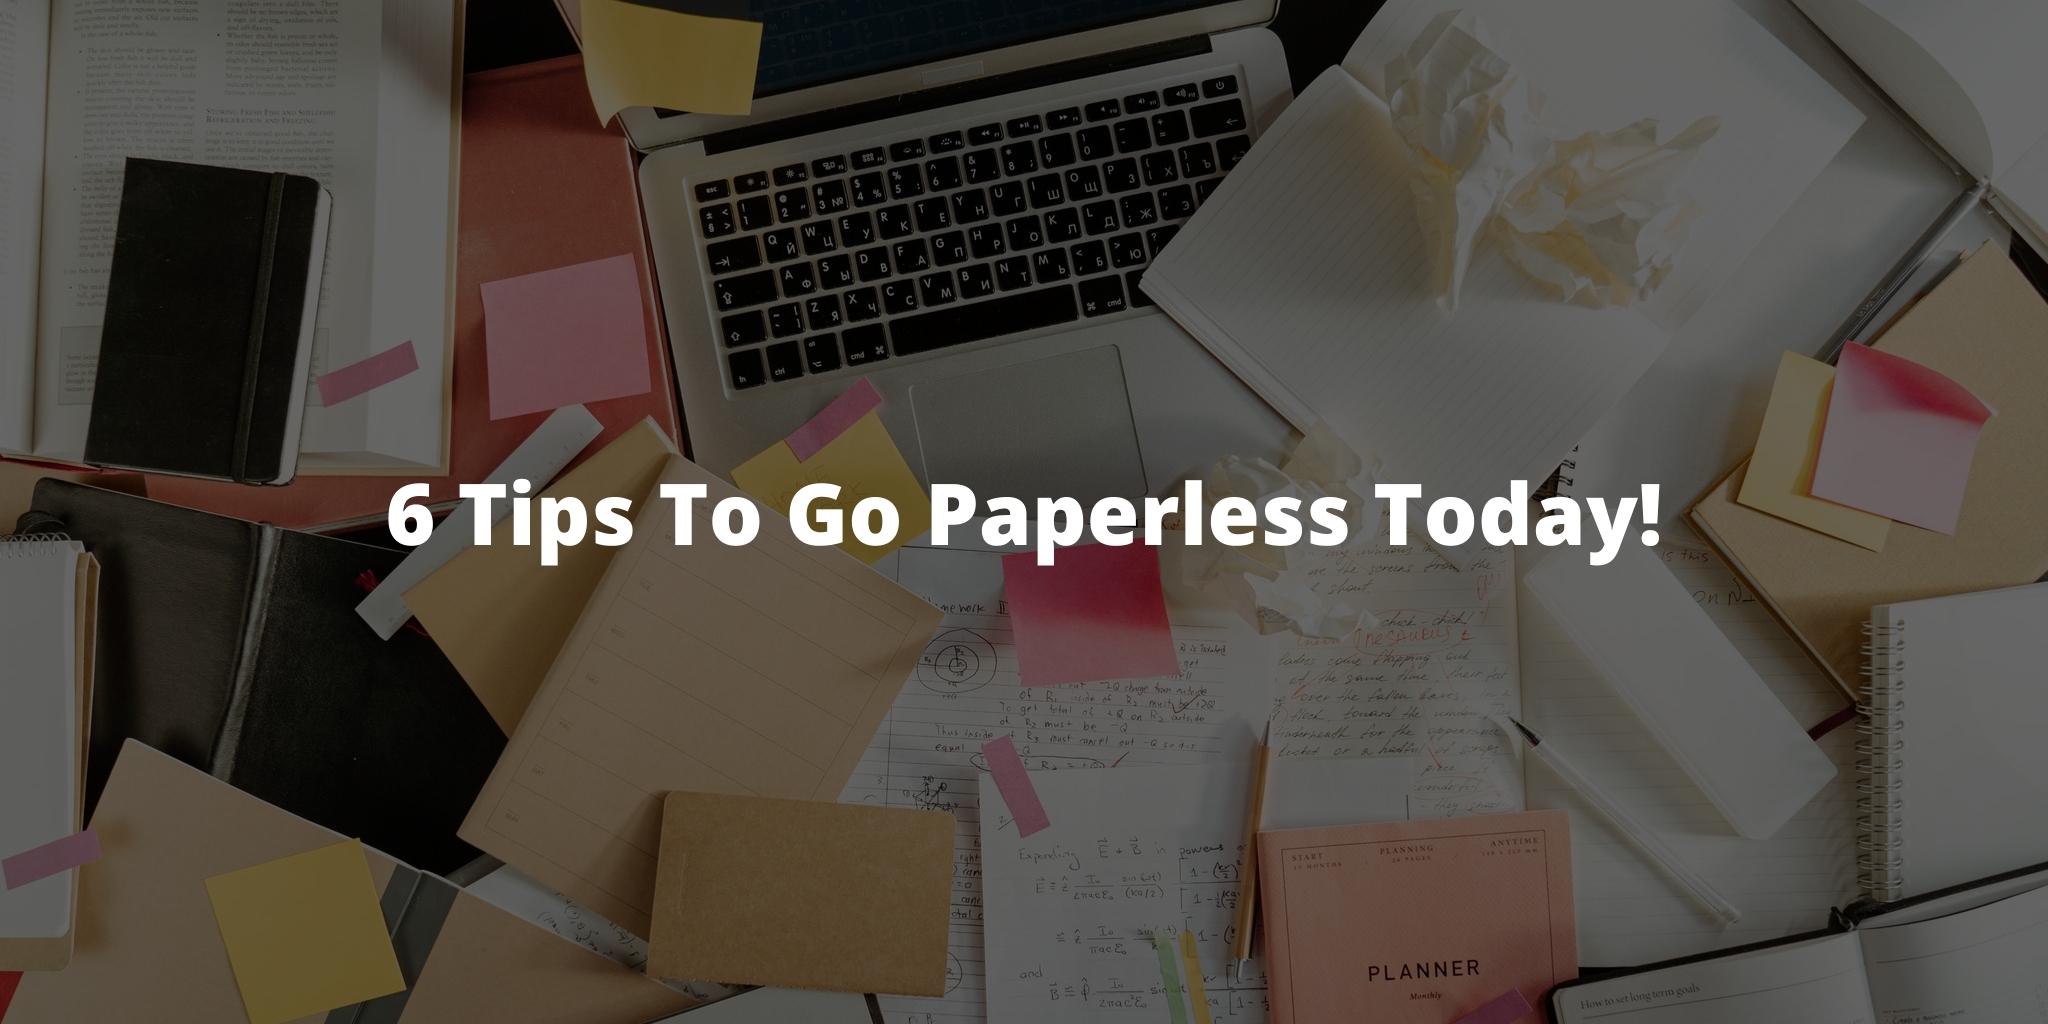 6 Tips To Go Paperless Today!